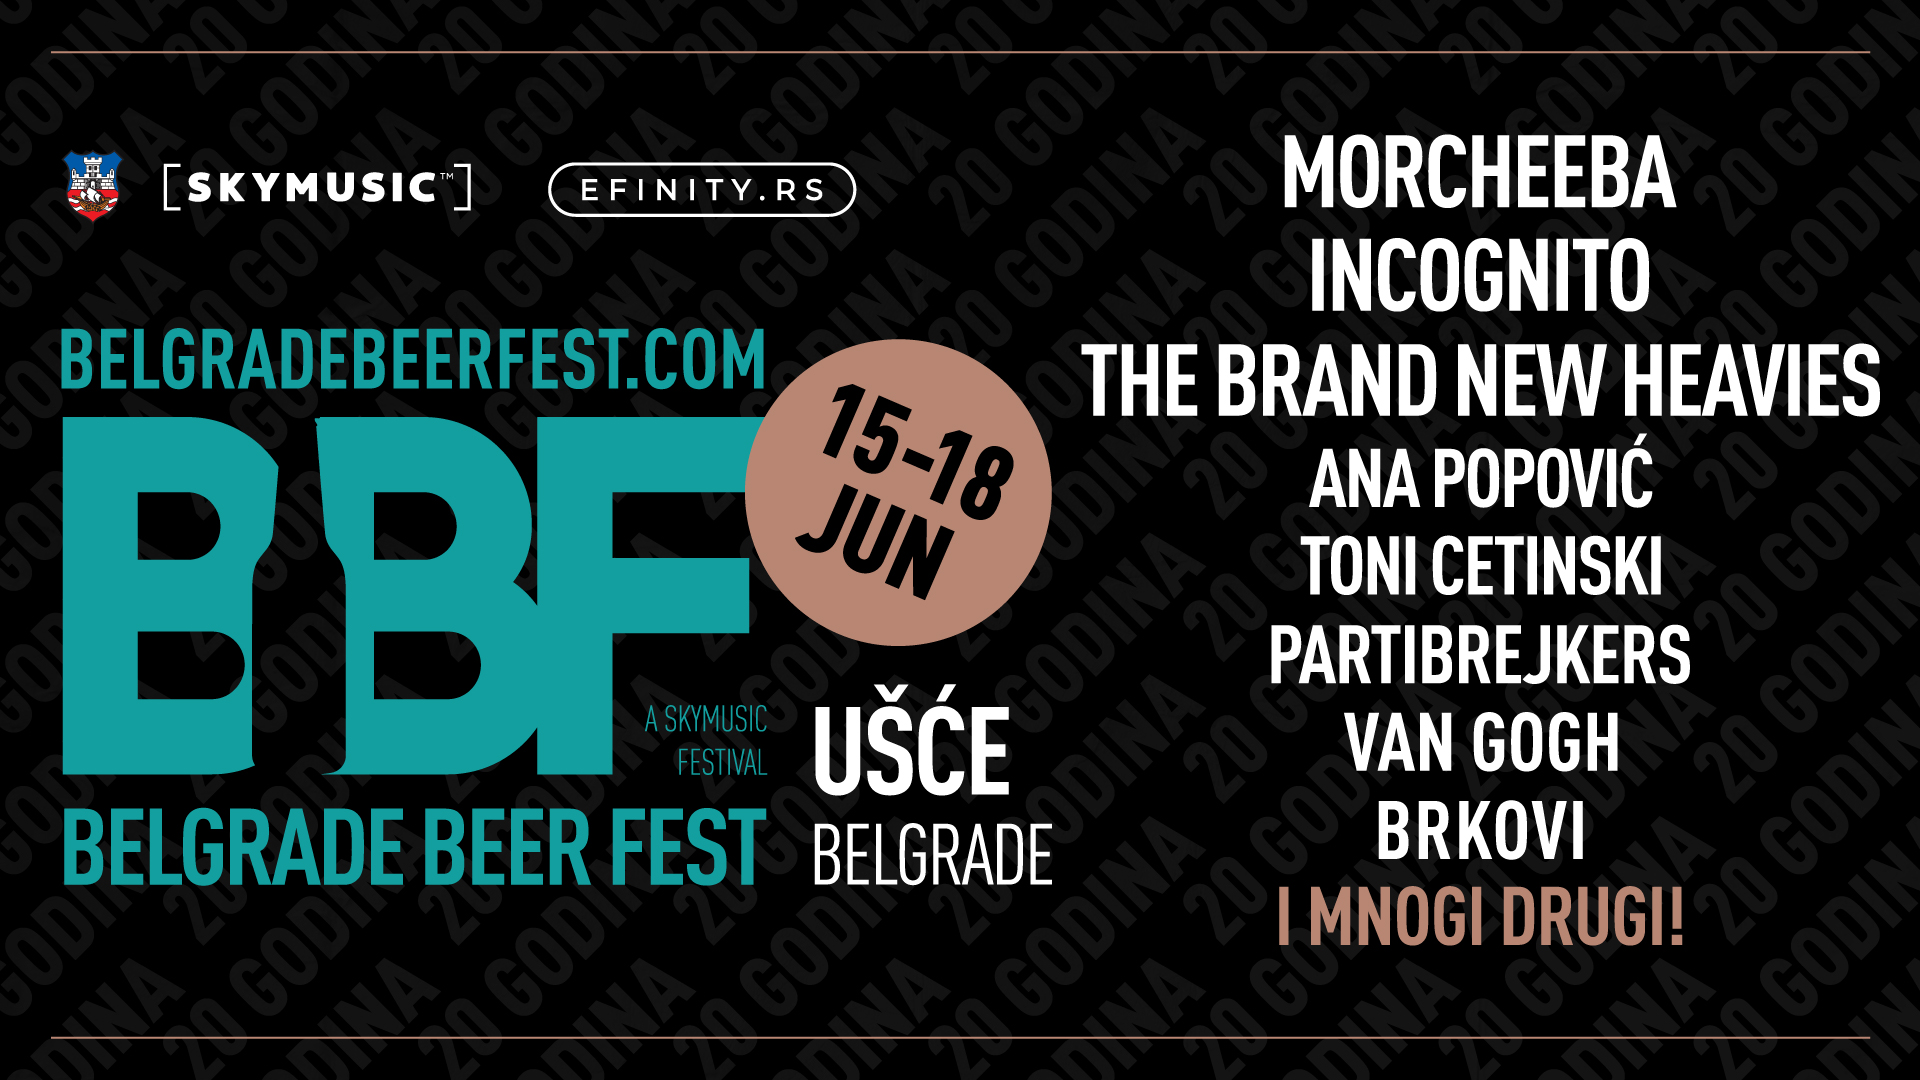 Entrance to the upcoming Belgrade Beer Fest will be free from 6 to 7 p.m